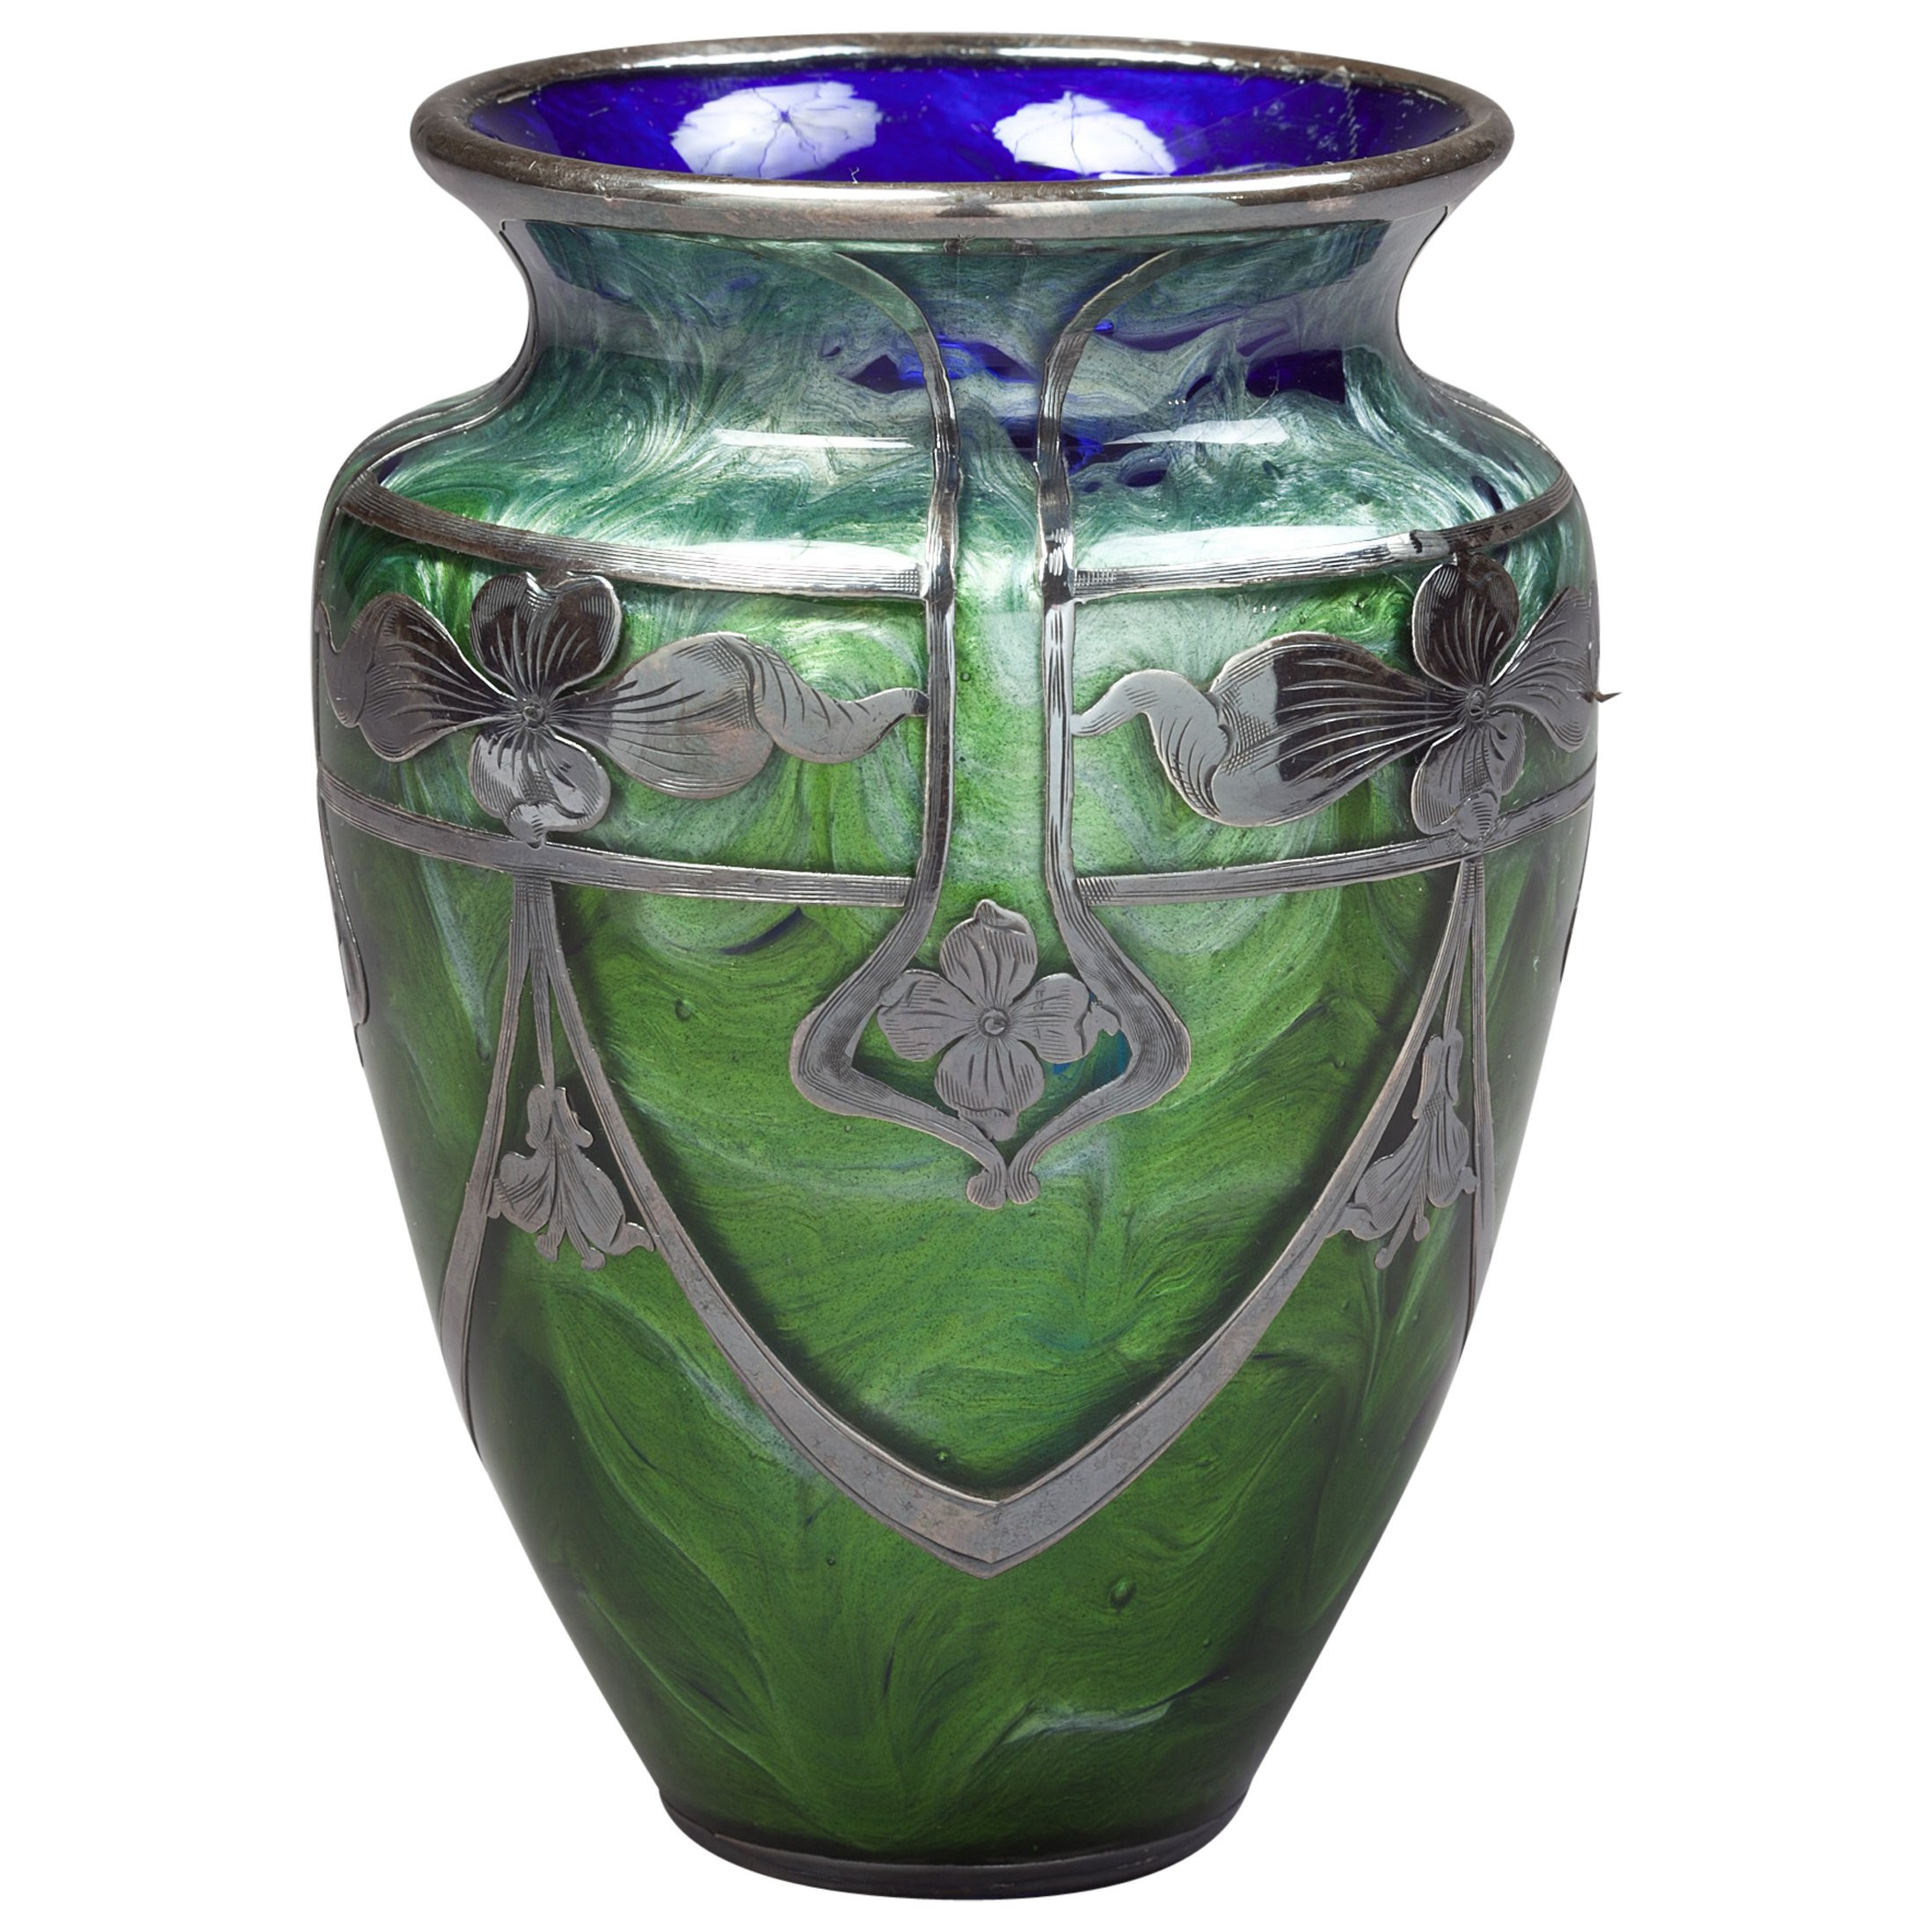 10 Awesome Vase Daum Nancy France 2024 free download vase daum nancy france of achaemenid revival repoussa silver vase persia circa 1900 for sale with regard to achaemenid revival repoussa silver vase persia circa 1900 for sale at 1stdibs